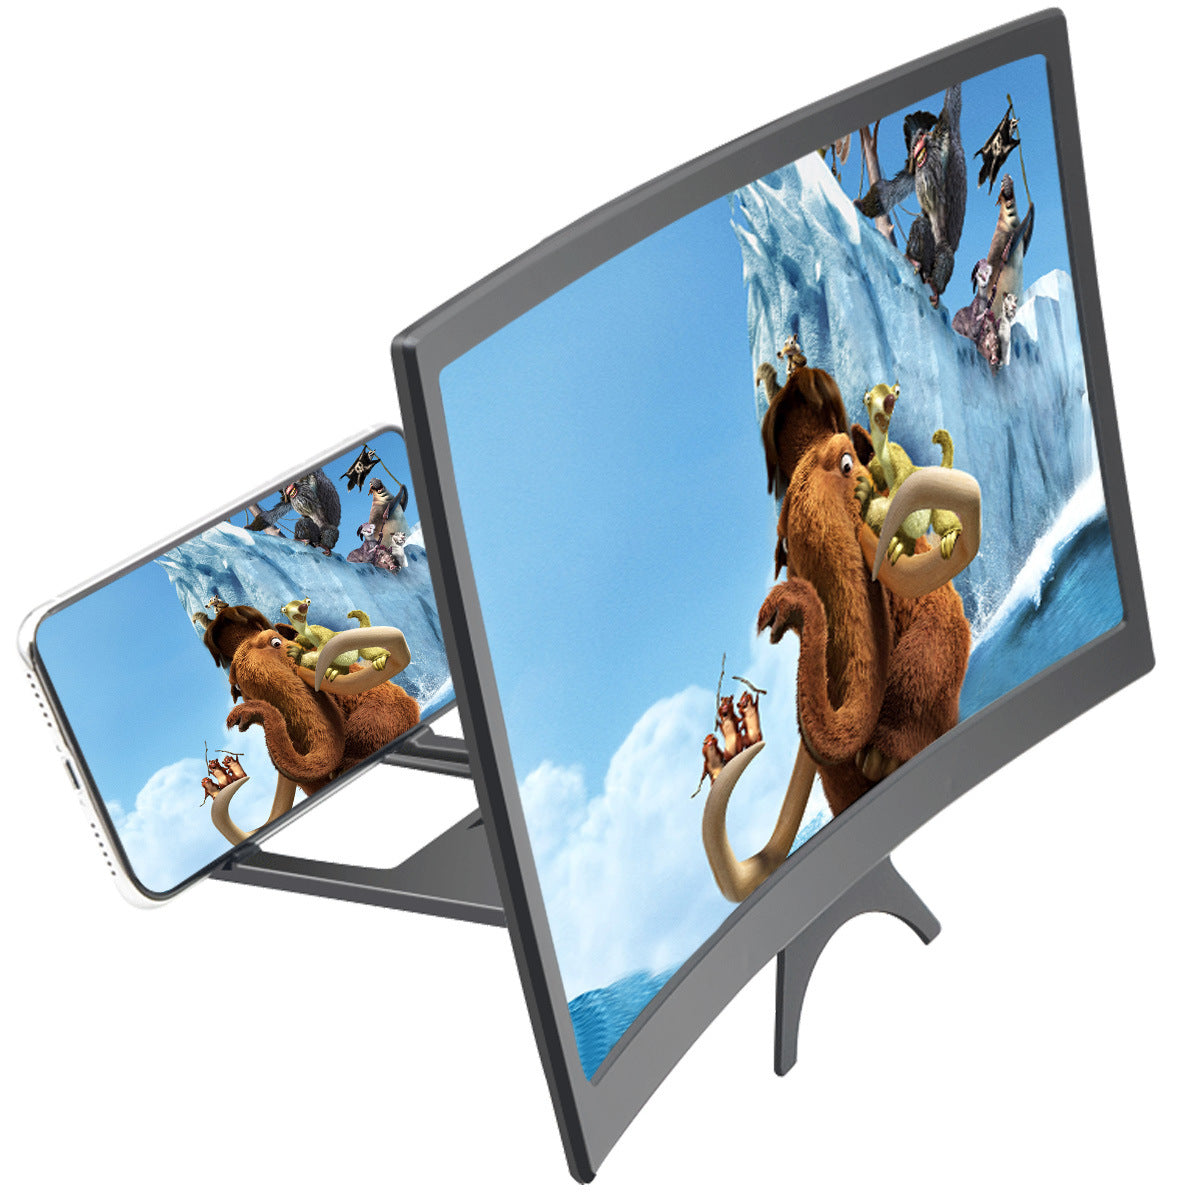 Mobile Phone Amplifier 12-inch Curved Mobile Phone Screen Amplifier